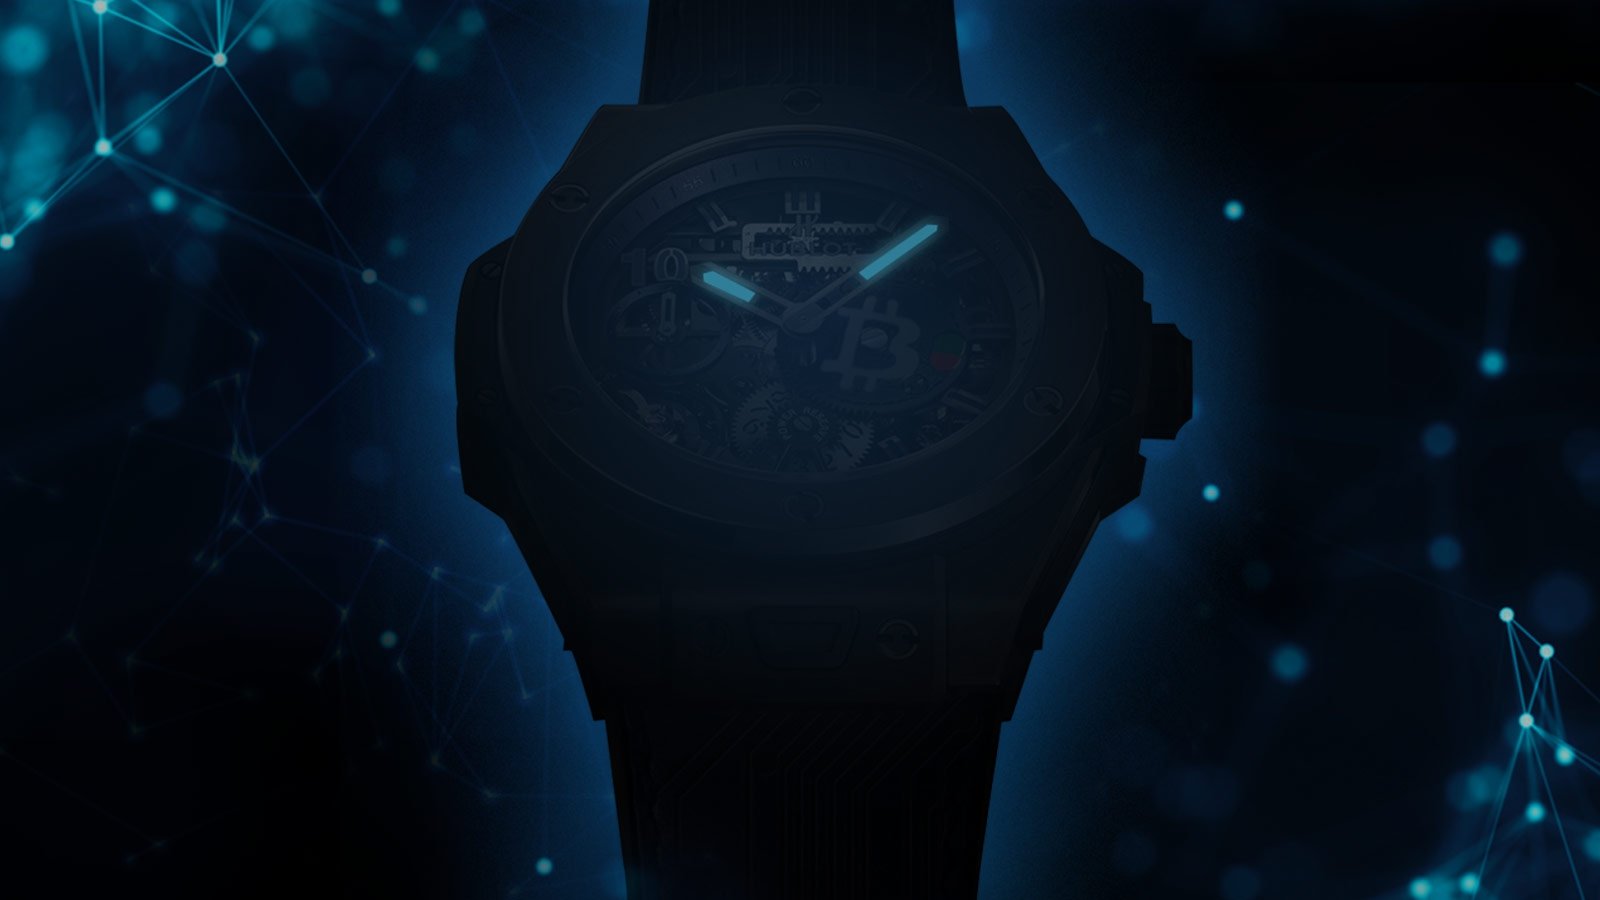 This new limited edition Hublot watch can only be purchased with Bitcoins